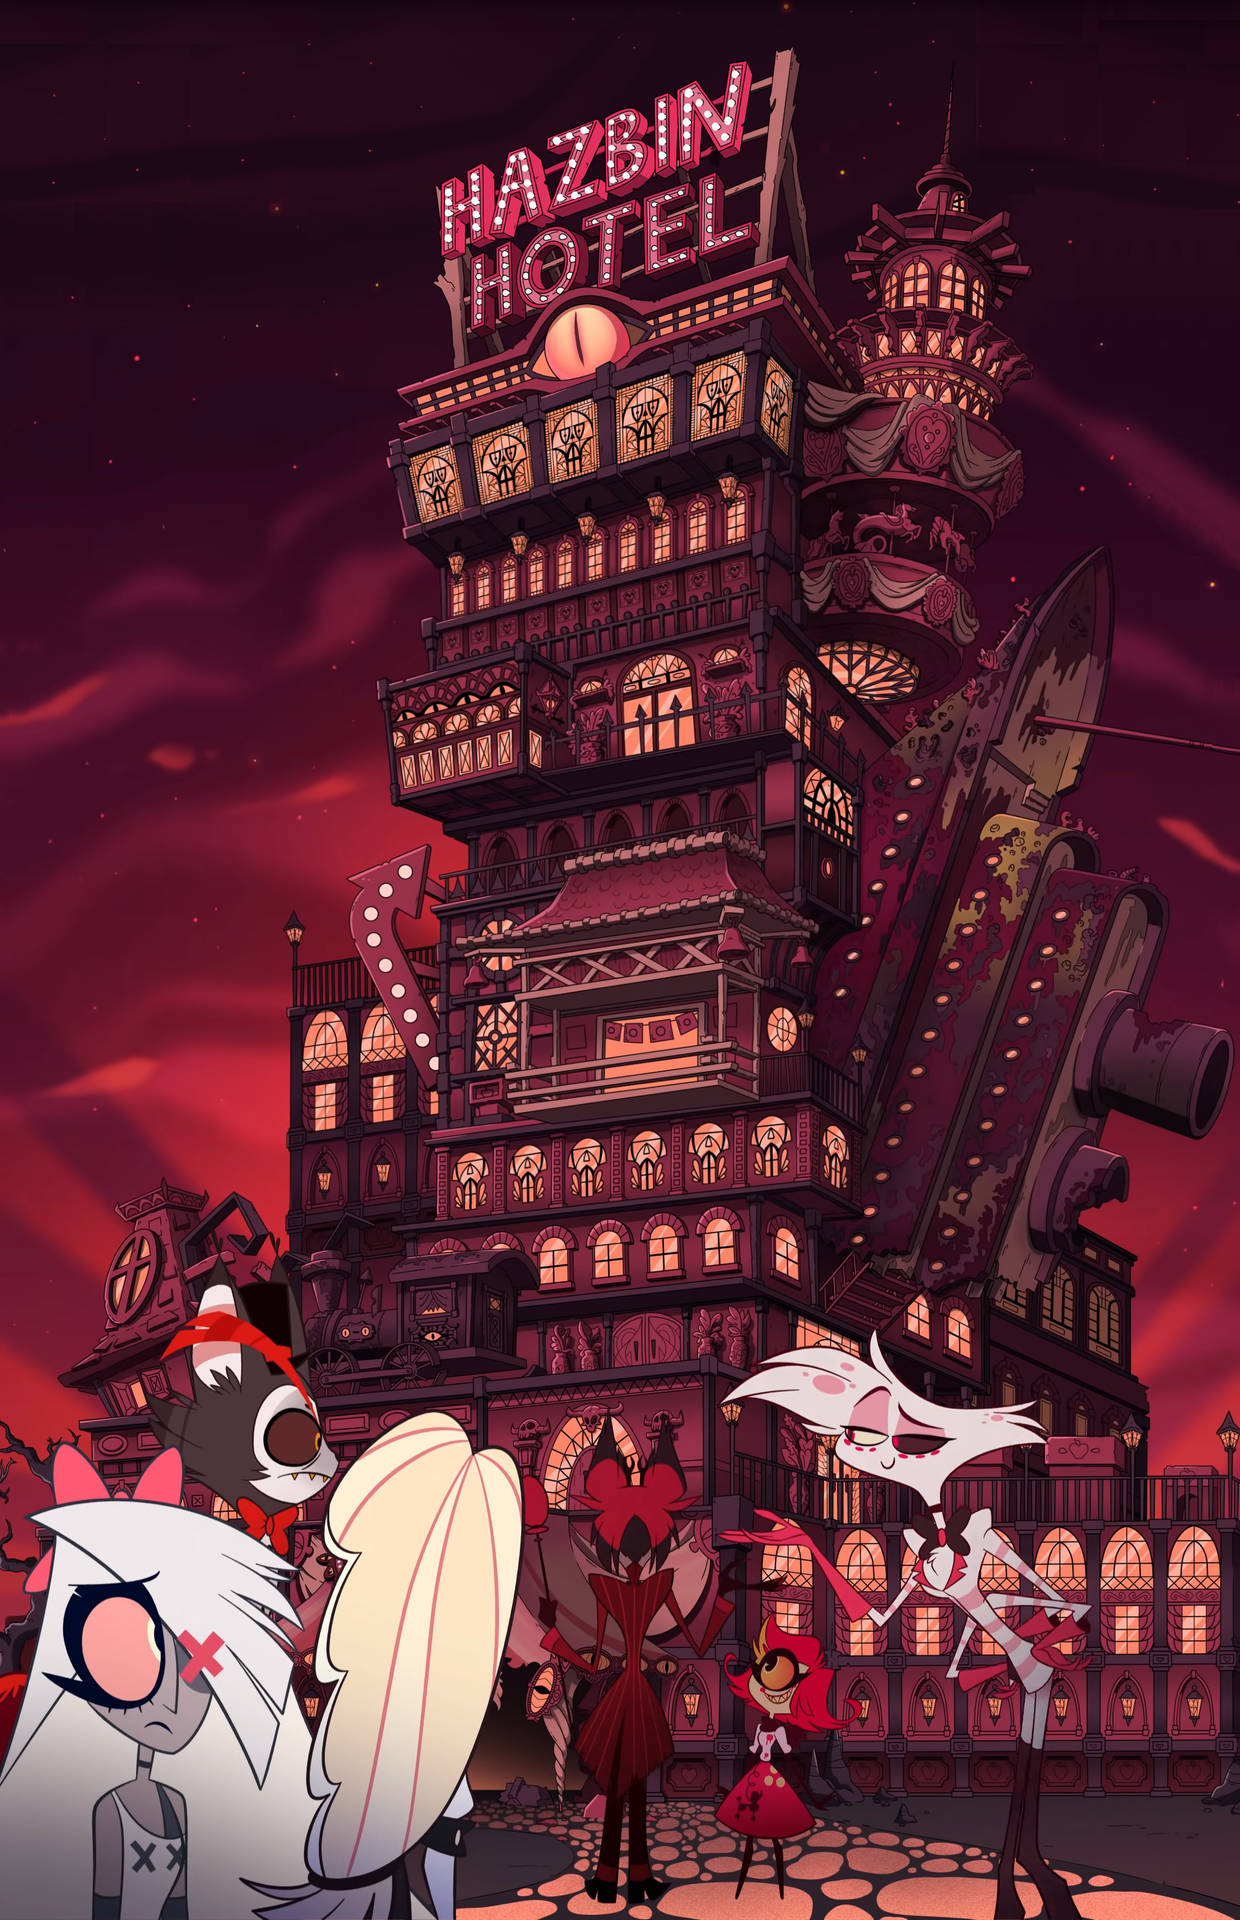 Welcome to the world of Hazbin Hotel! Wallpaper